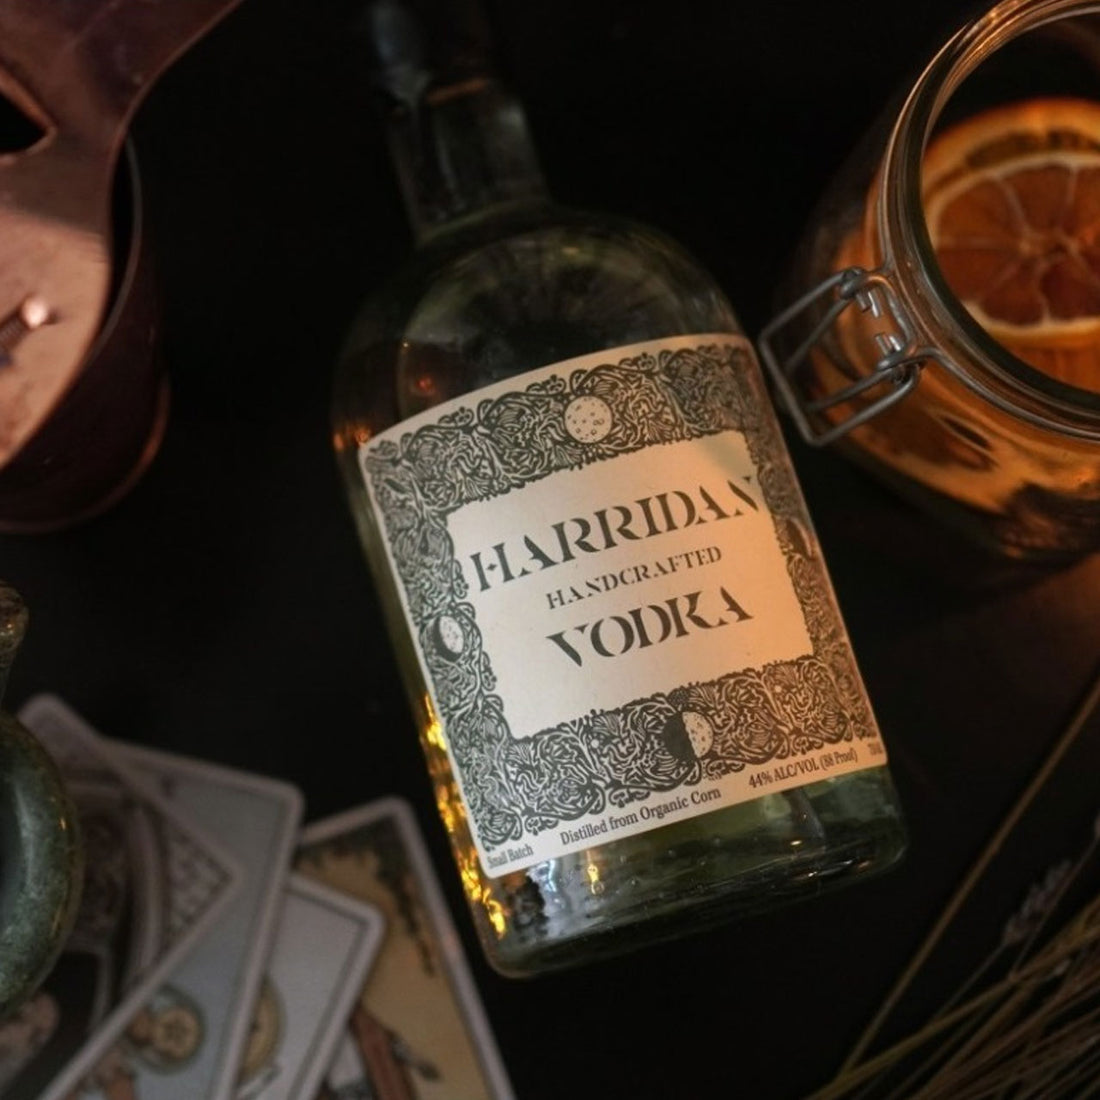 Harridan Vodka bottle laying down on a table.